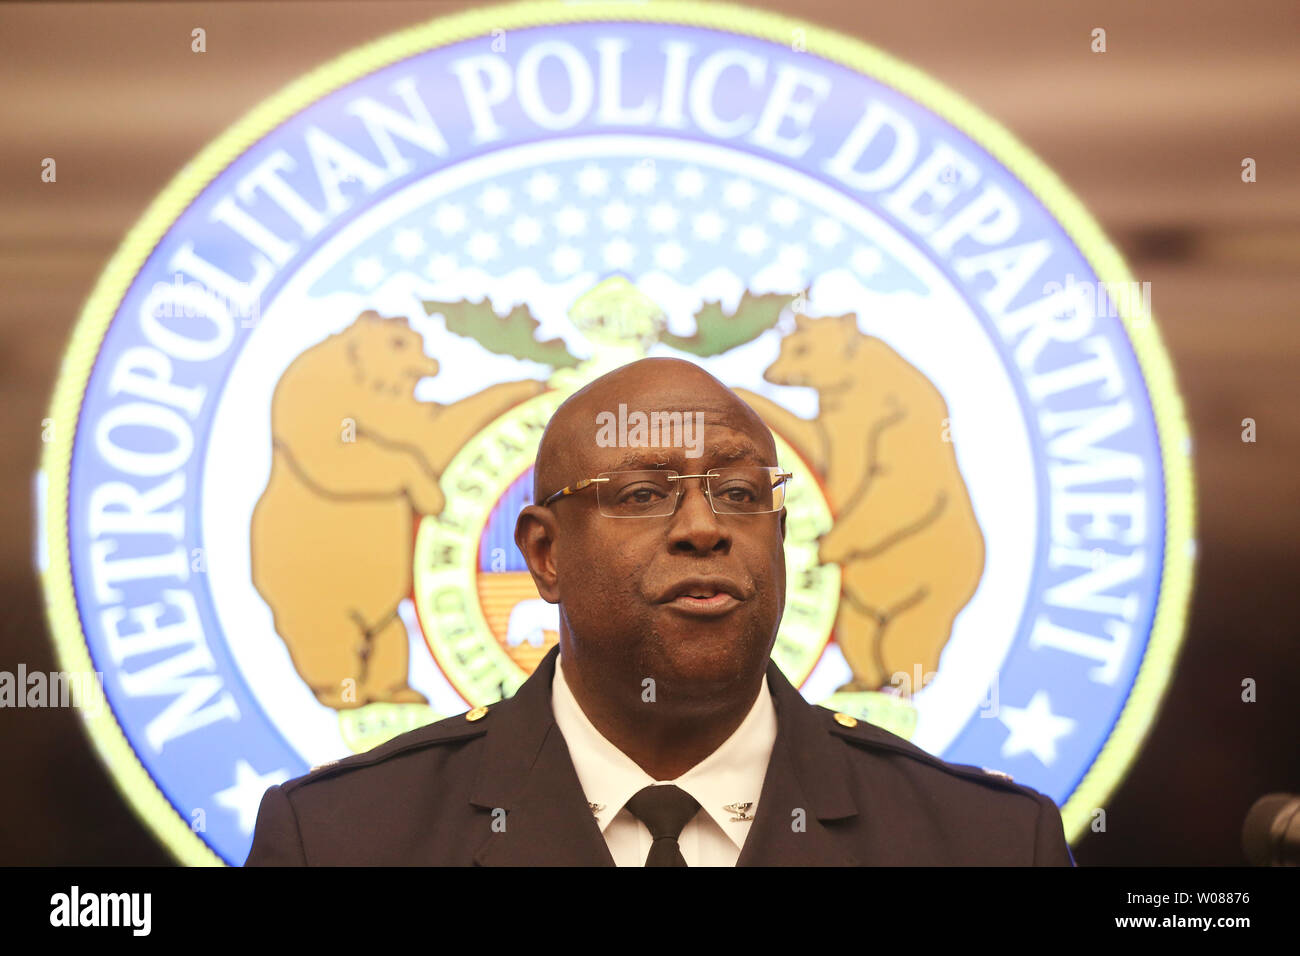 St. Louis Metropolitian Police Chief John Hayden talks about the shooting death of officer Katlyn Alix during a press conference in St. Louis on January 31, 2019. St. Louis Circuit Attorney Kim Gardner has brought multiple concerns to the media on how the department handled the initial investigation. Hayden said he called the press conference to clarify as much as he can surrounding the tragic incident which occured on January 24, 2019, by a fellow St. Louis Police officer. Photo by Bill Greenblatt/UPI Stock Photo